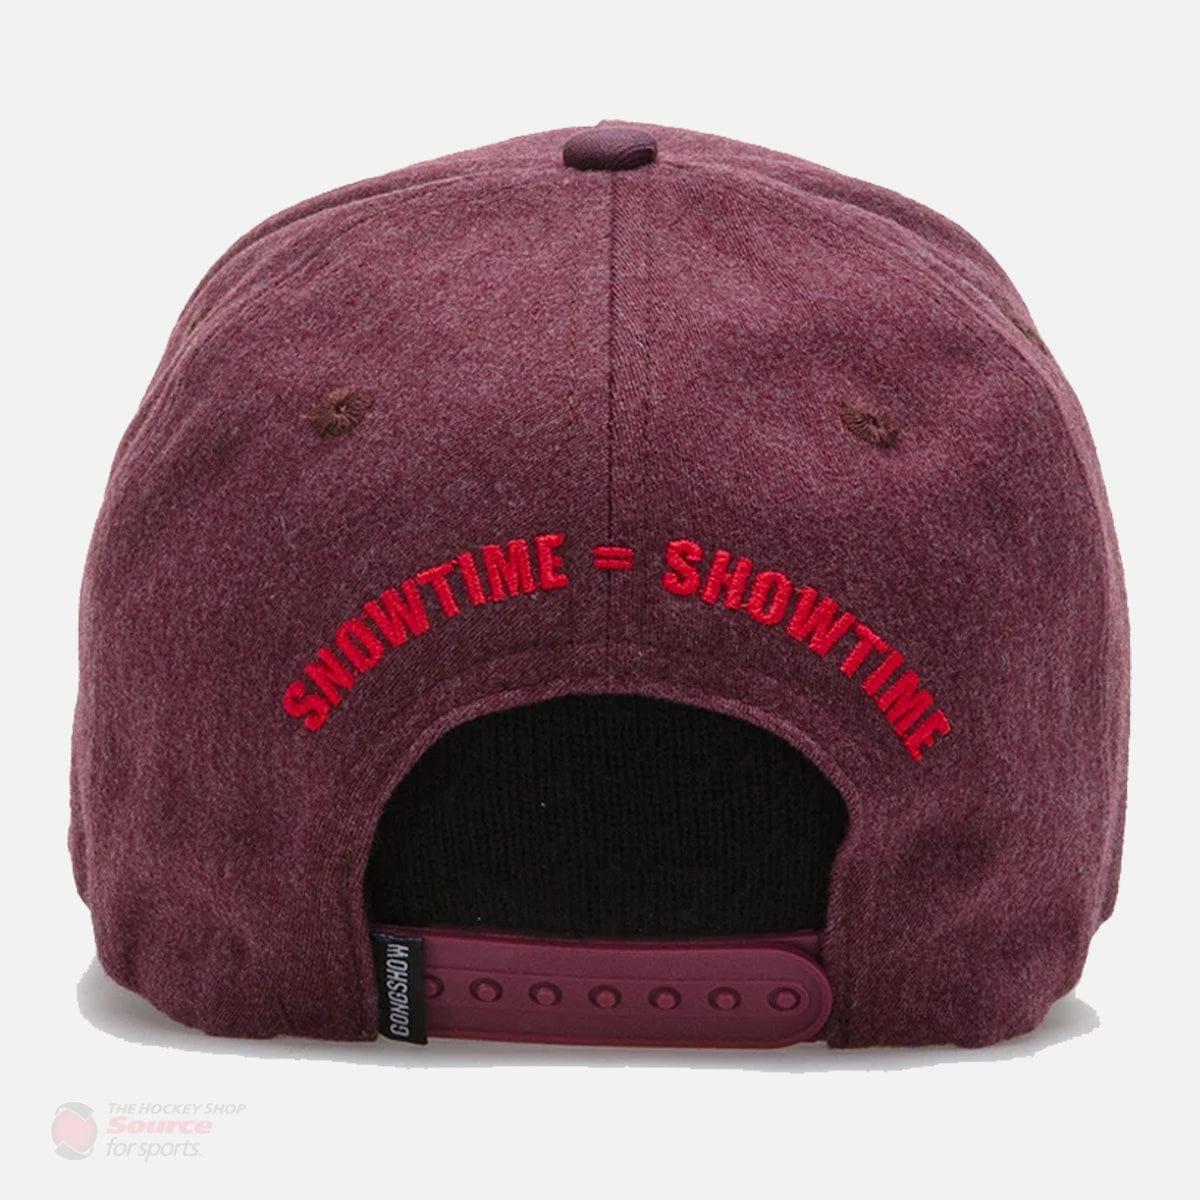 Gongshow Hockey Cold Front Snapback Hat